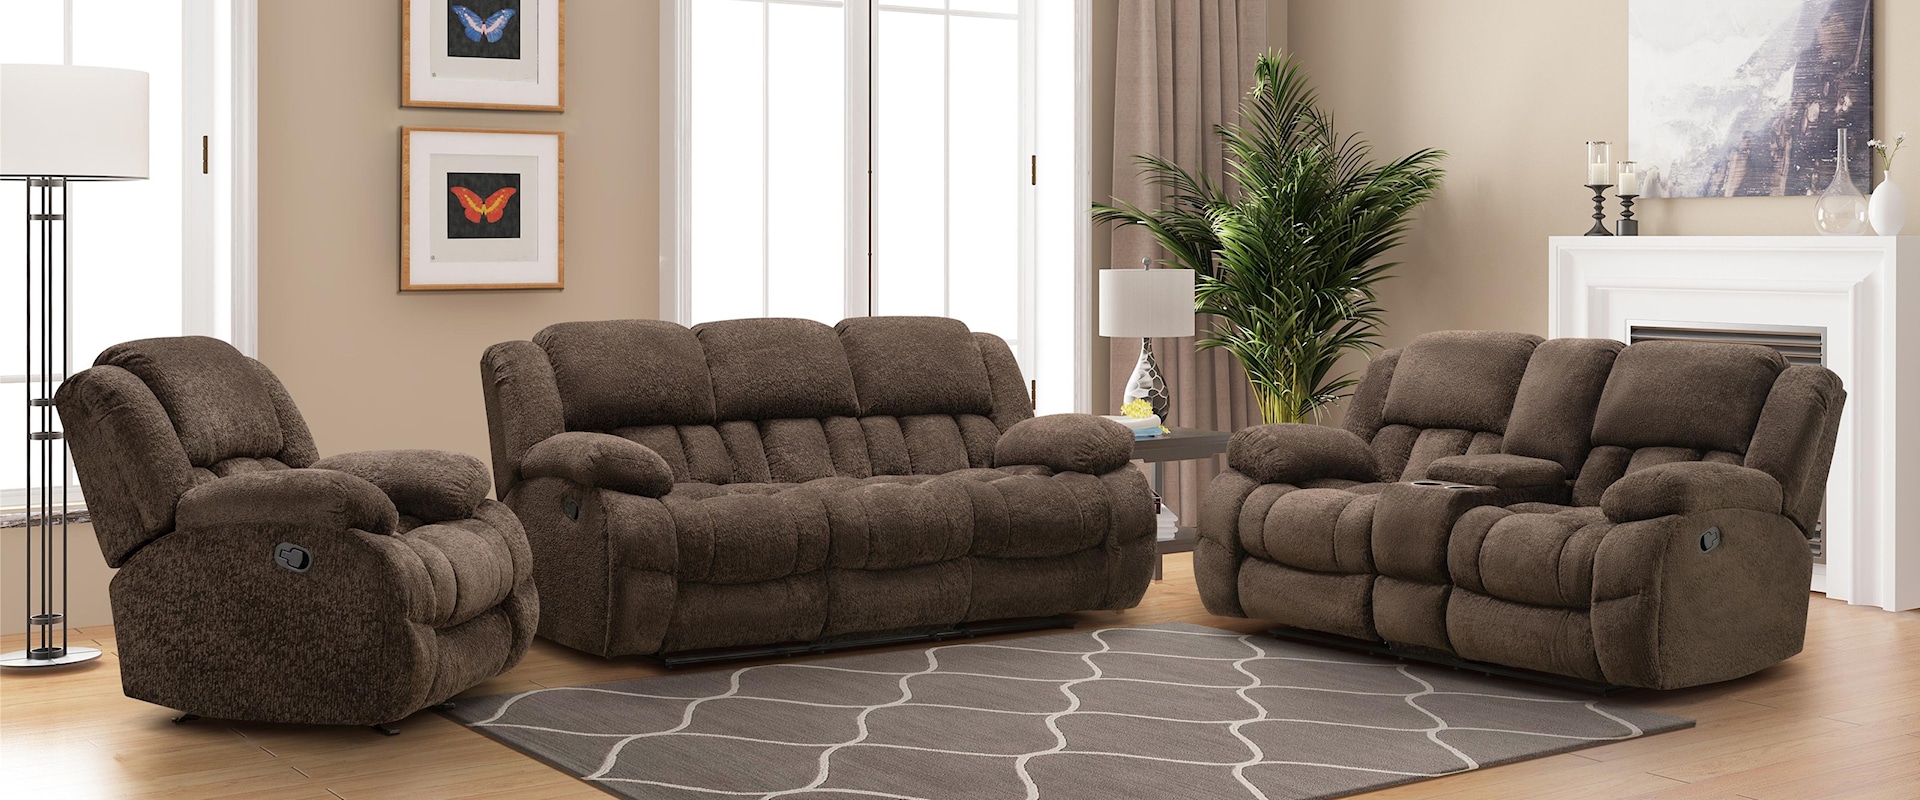 3 Piece Reclining Living Room Group